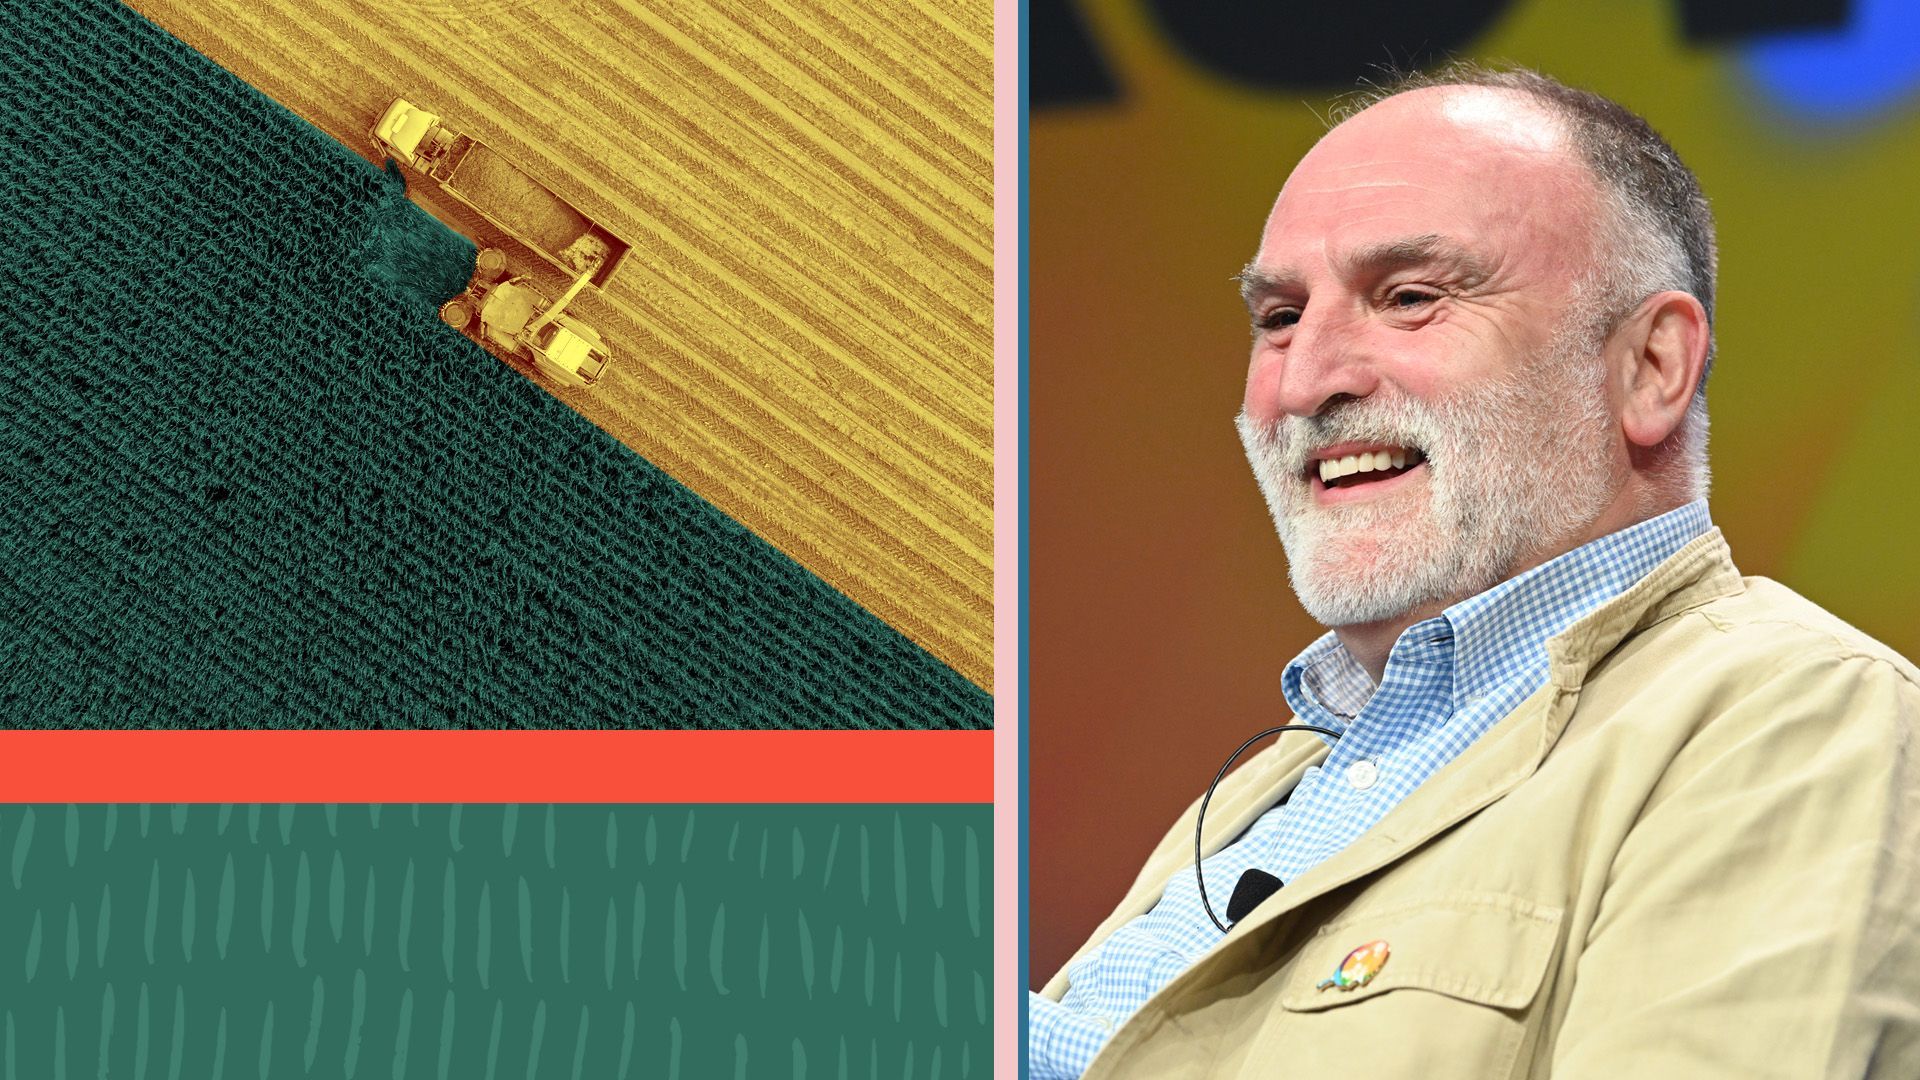 Photo illustration of José Andrés with various shapes and a photo of tractor harvesting a field 